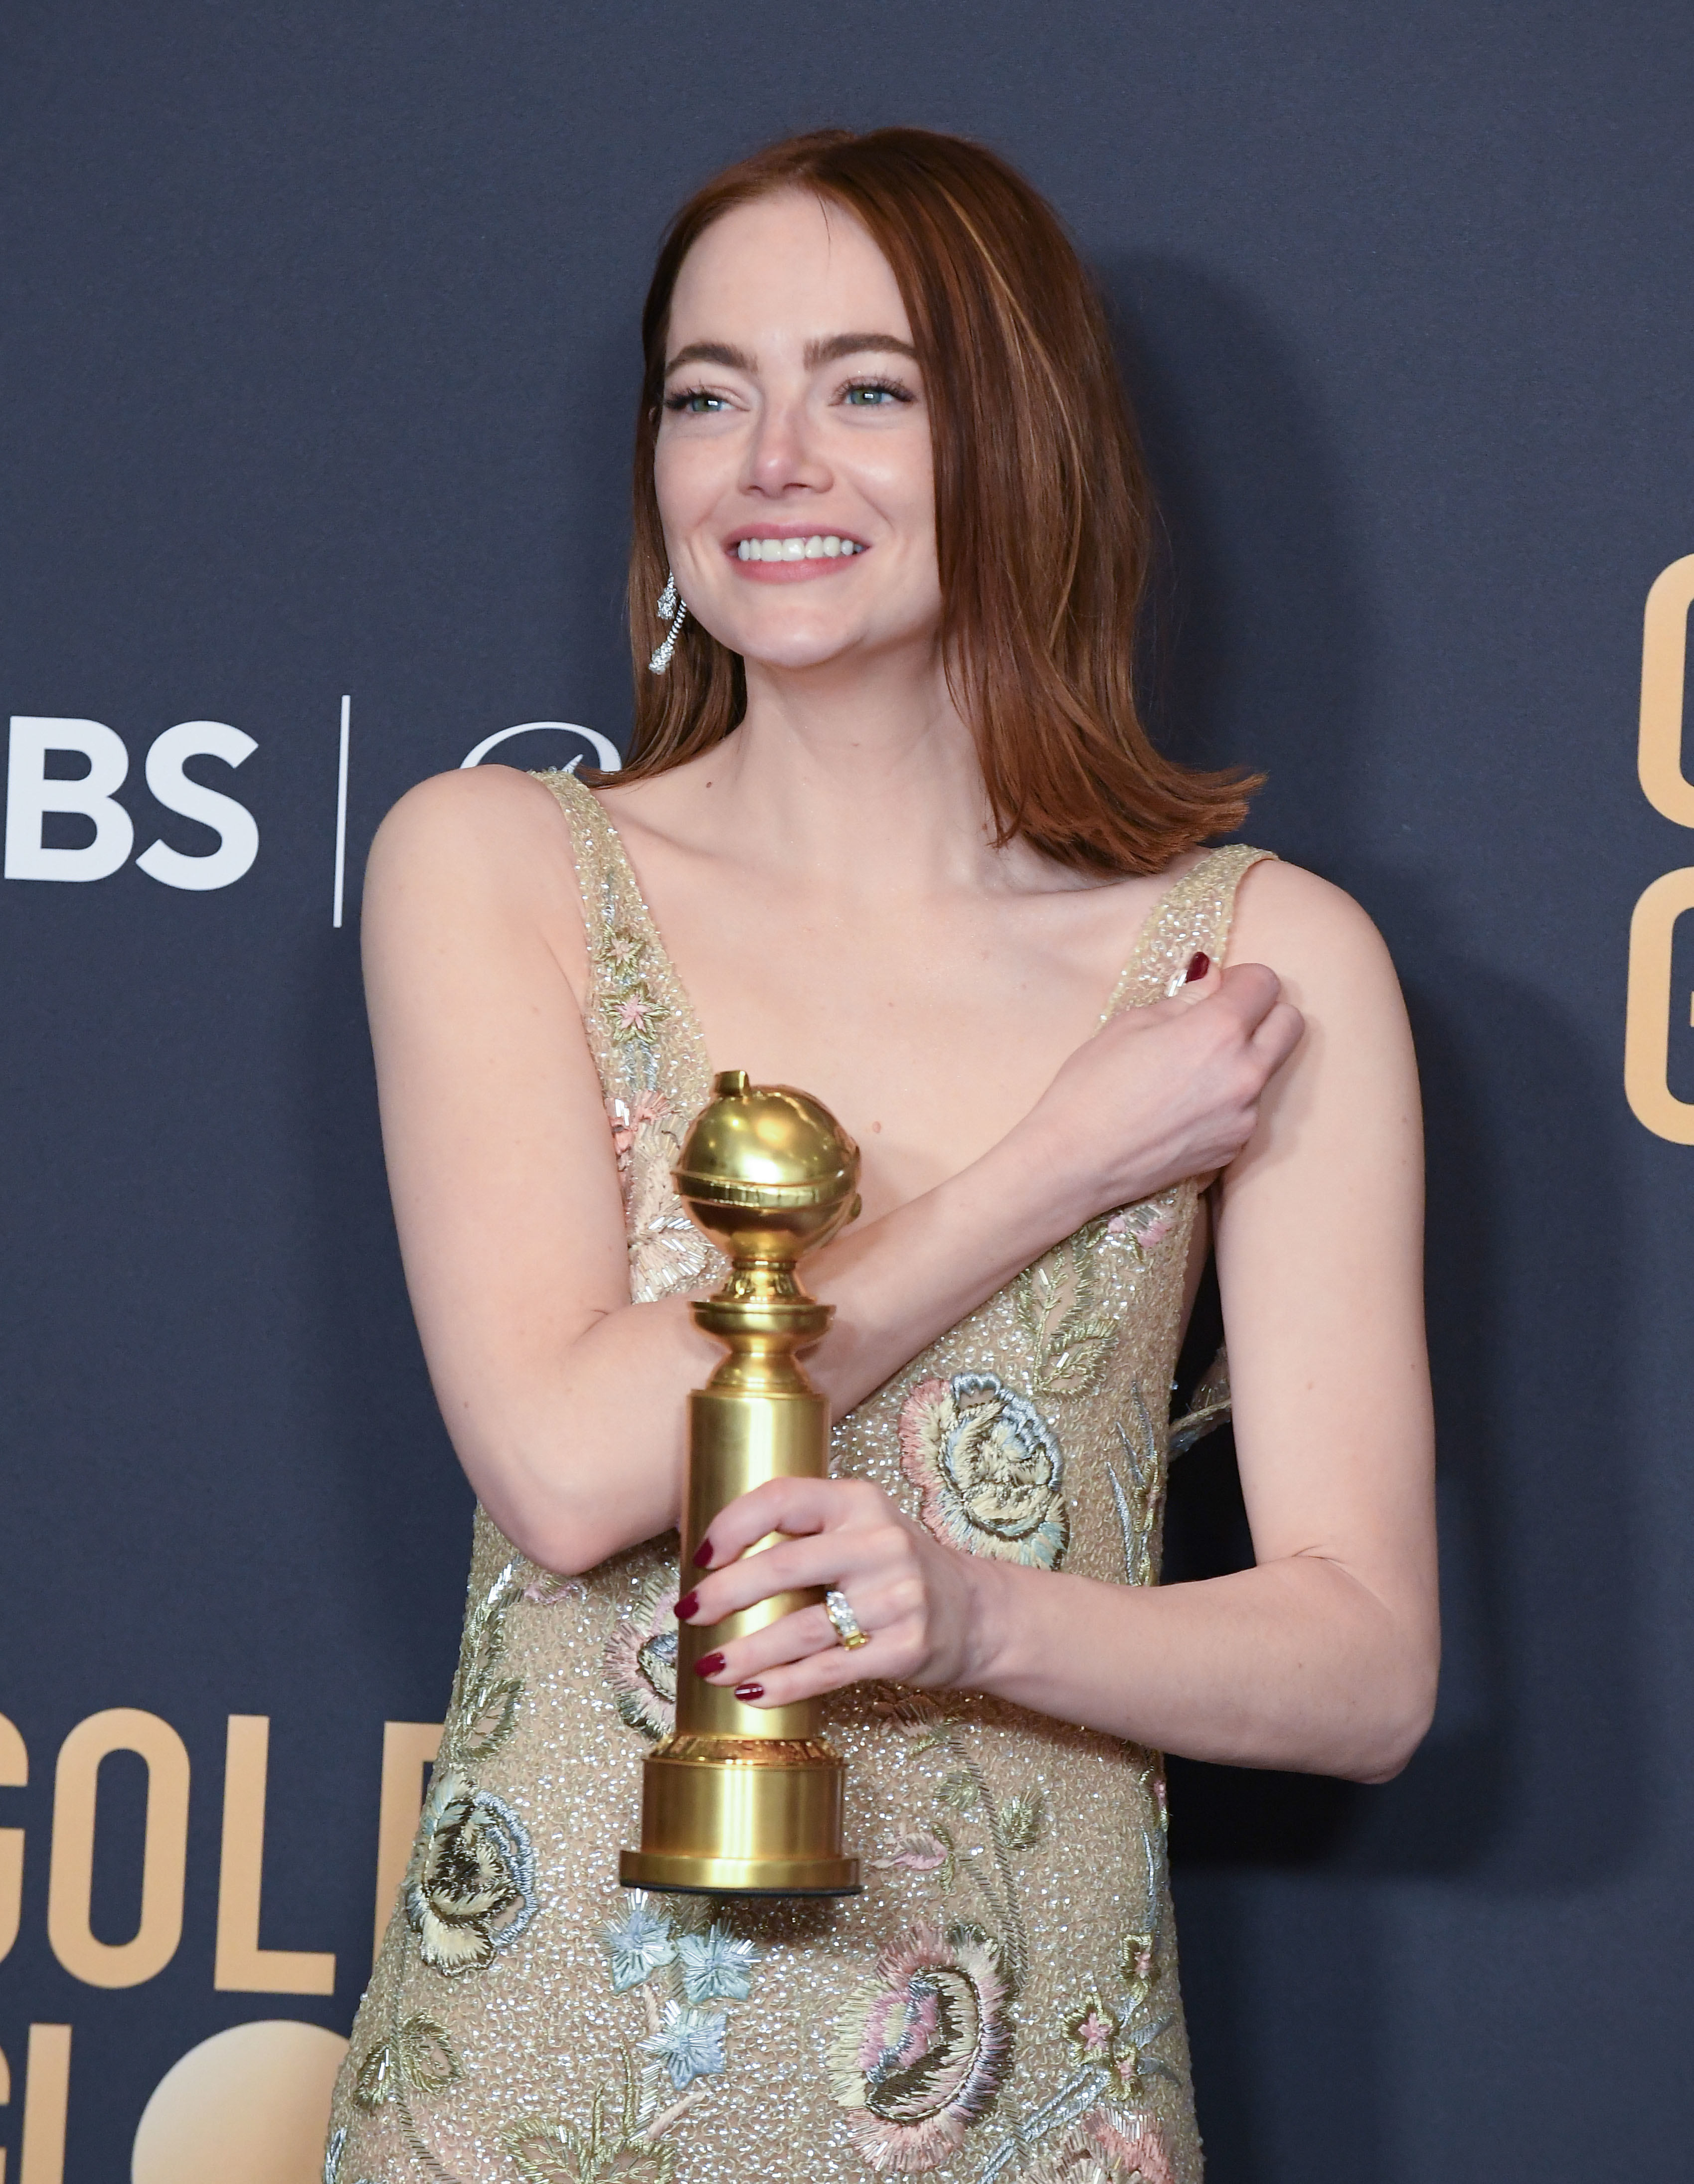 Emma Stone wearing an embellished gown, holding a Golden Globe award, smiling